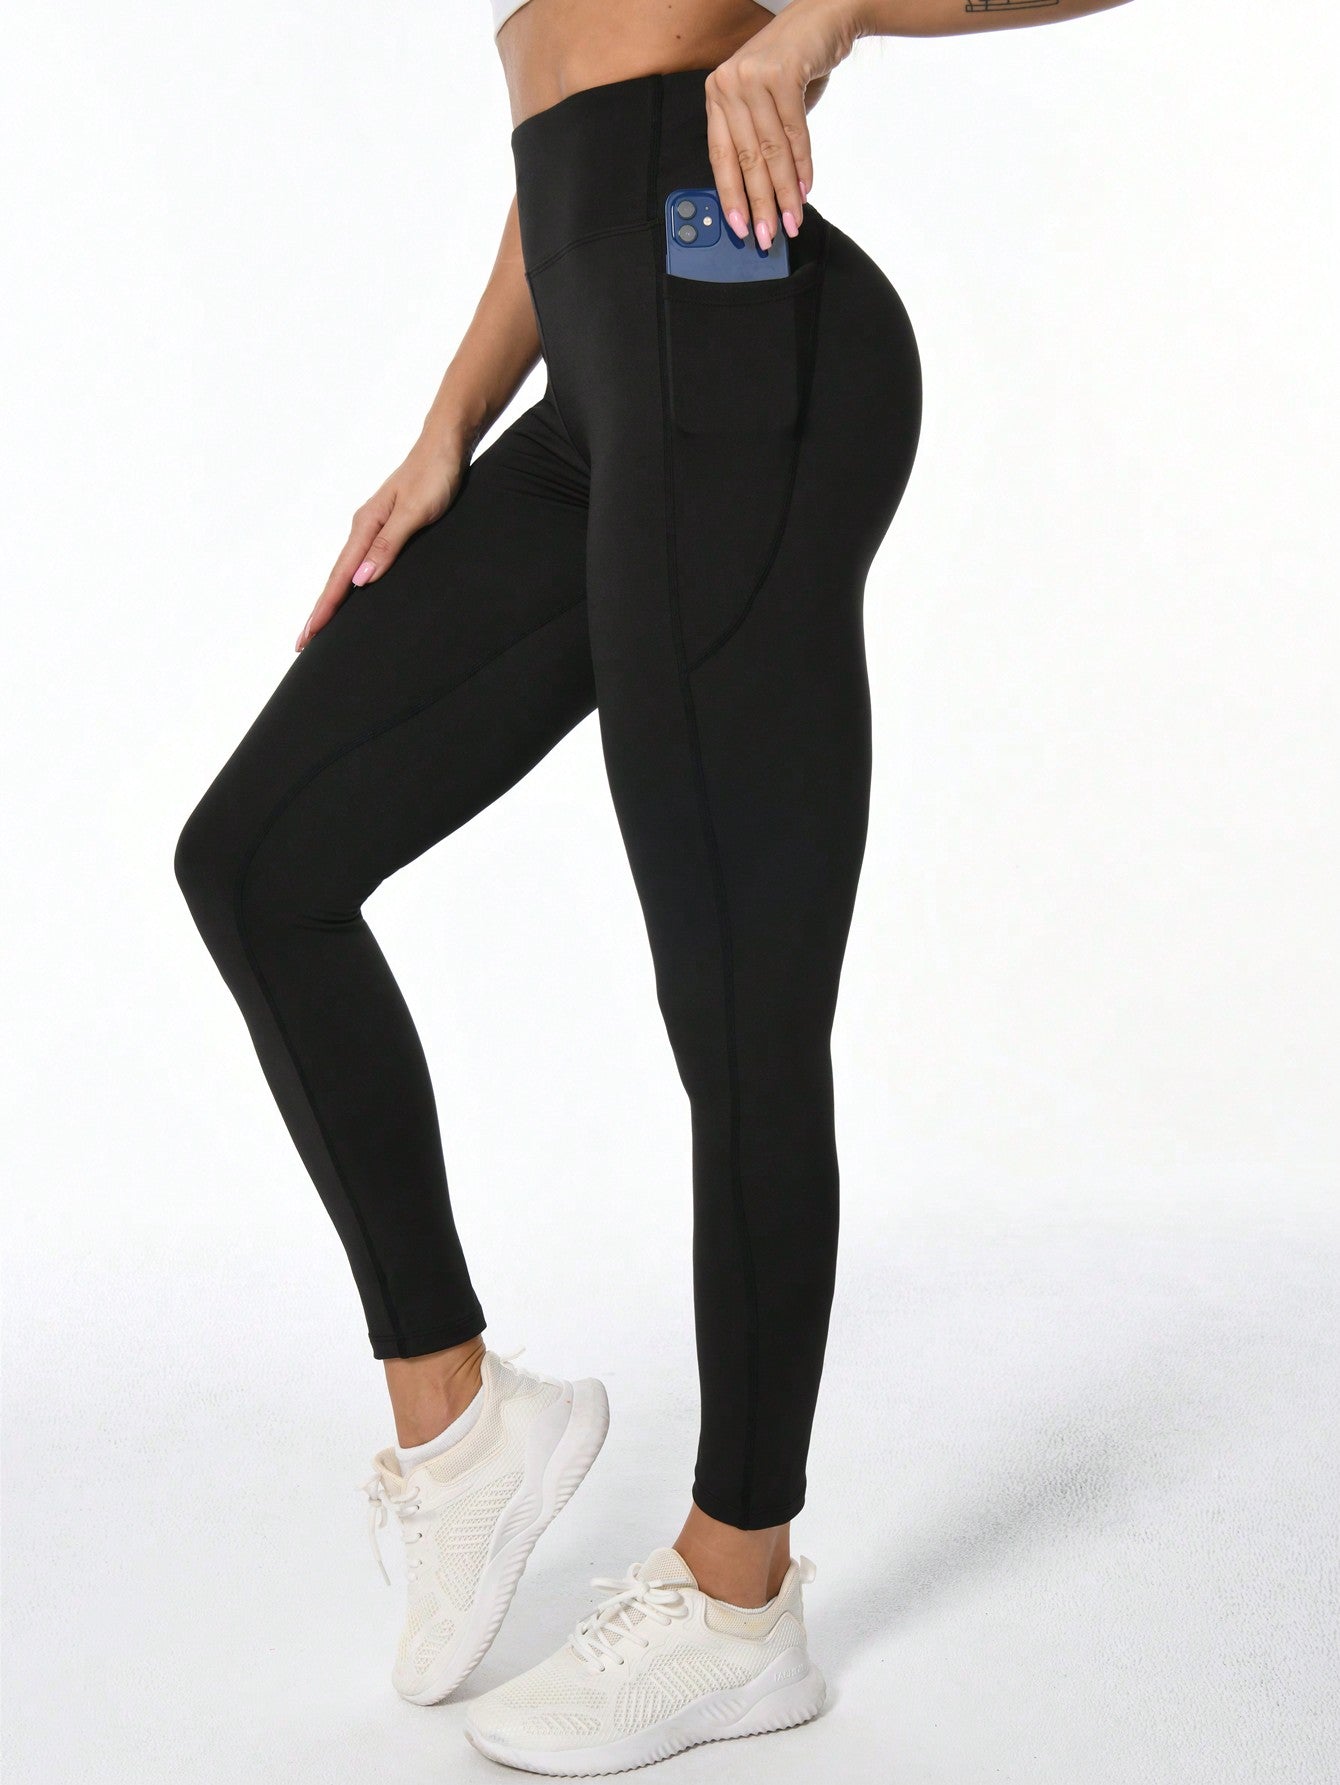 Sleek Solid High Waist Leggings with Convenient Side Phone Pocket for Modern Active Women